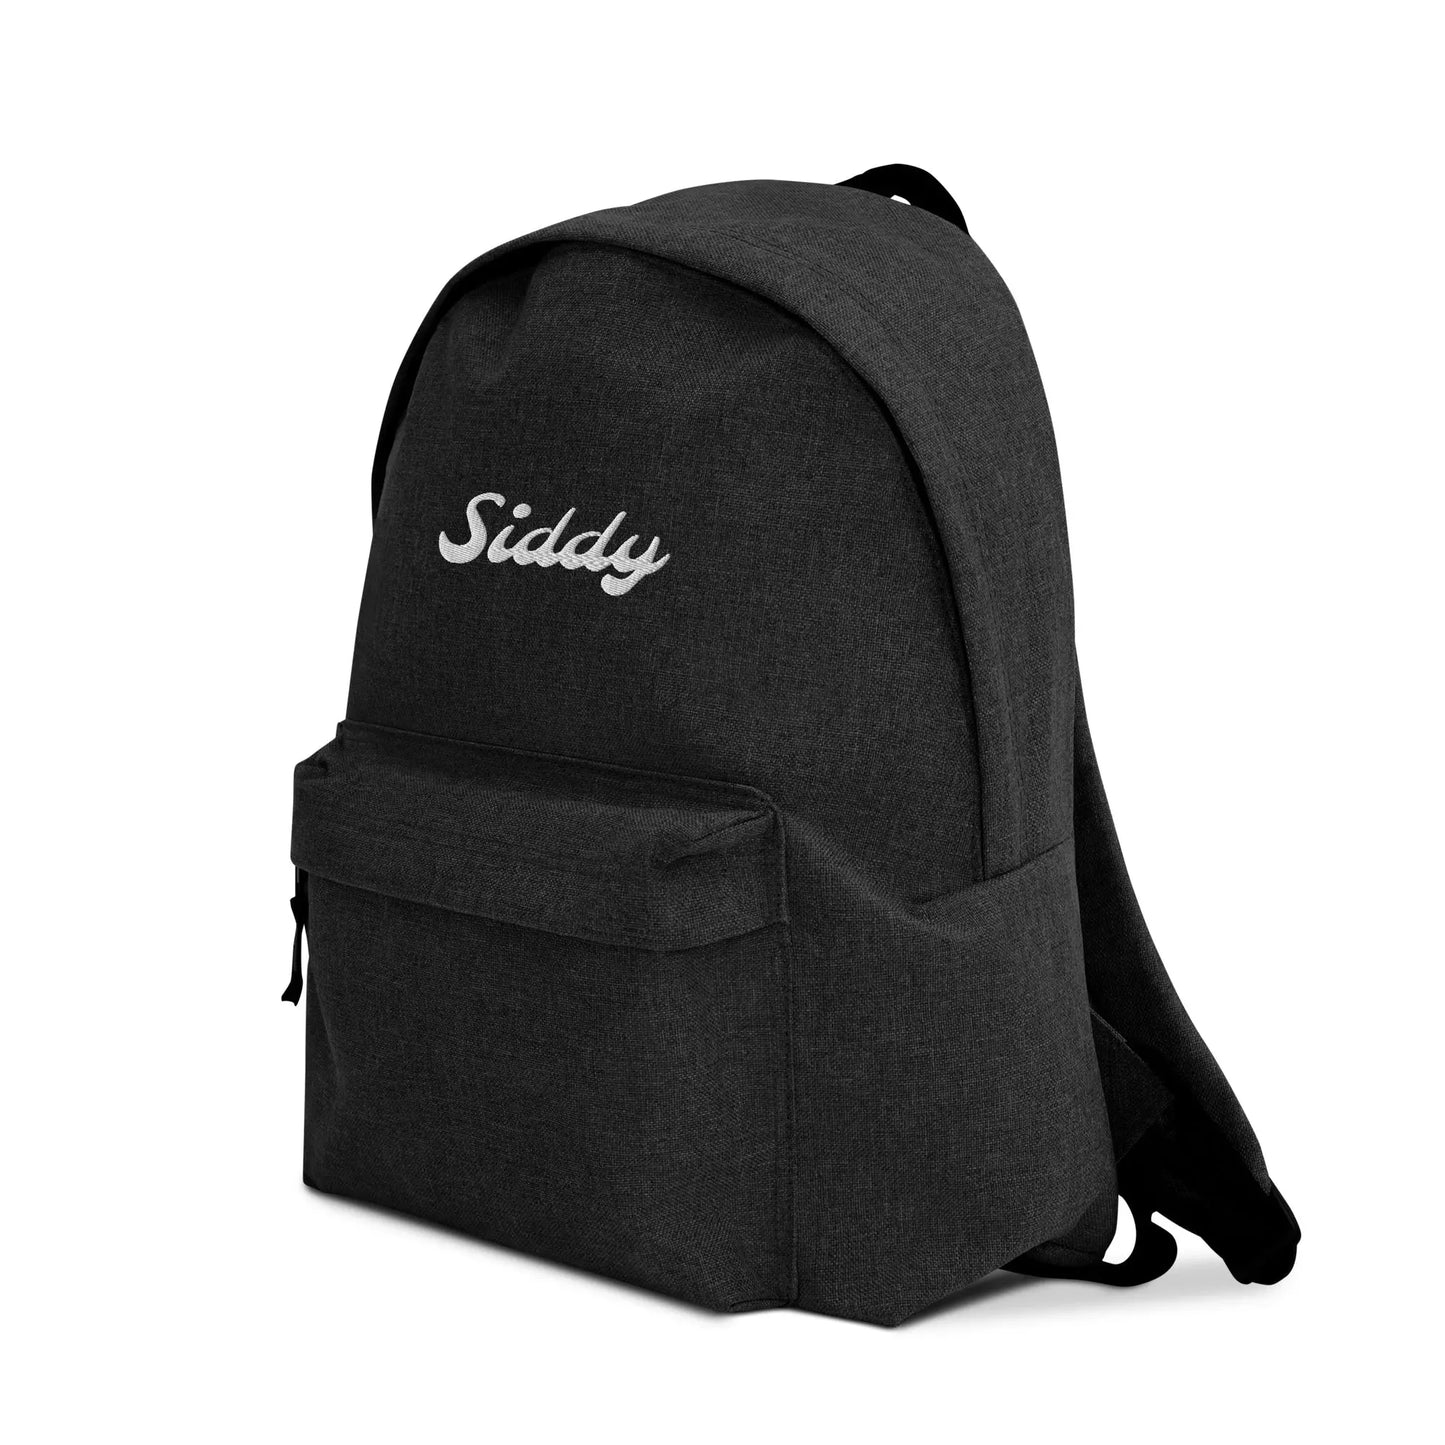 Siddy Embroidered Backpack All The Tea And More